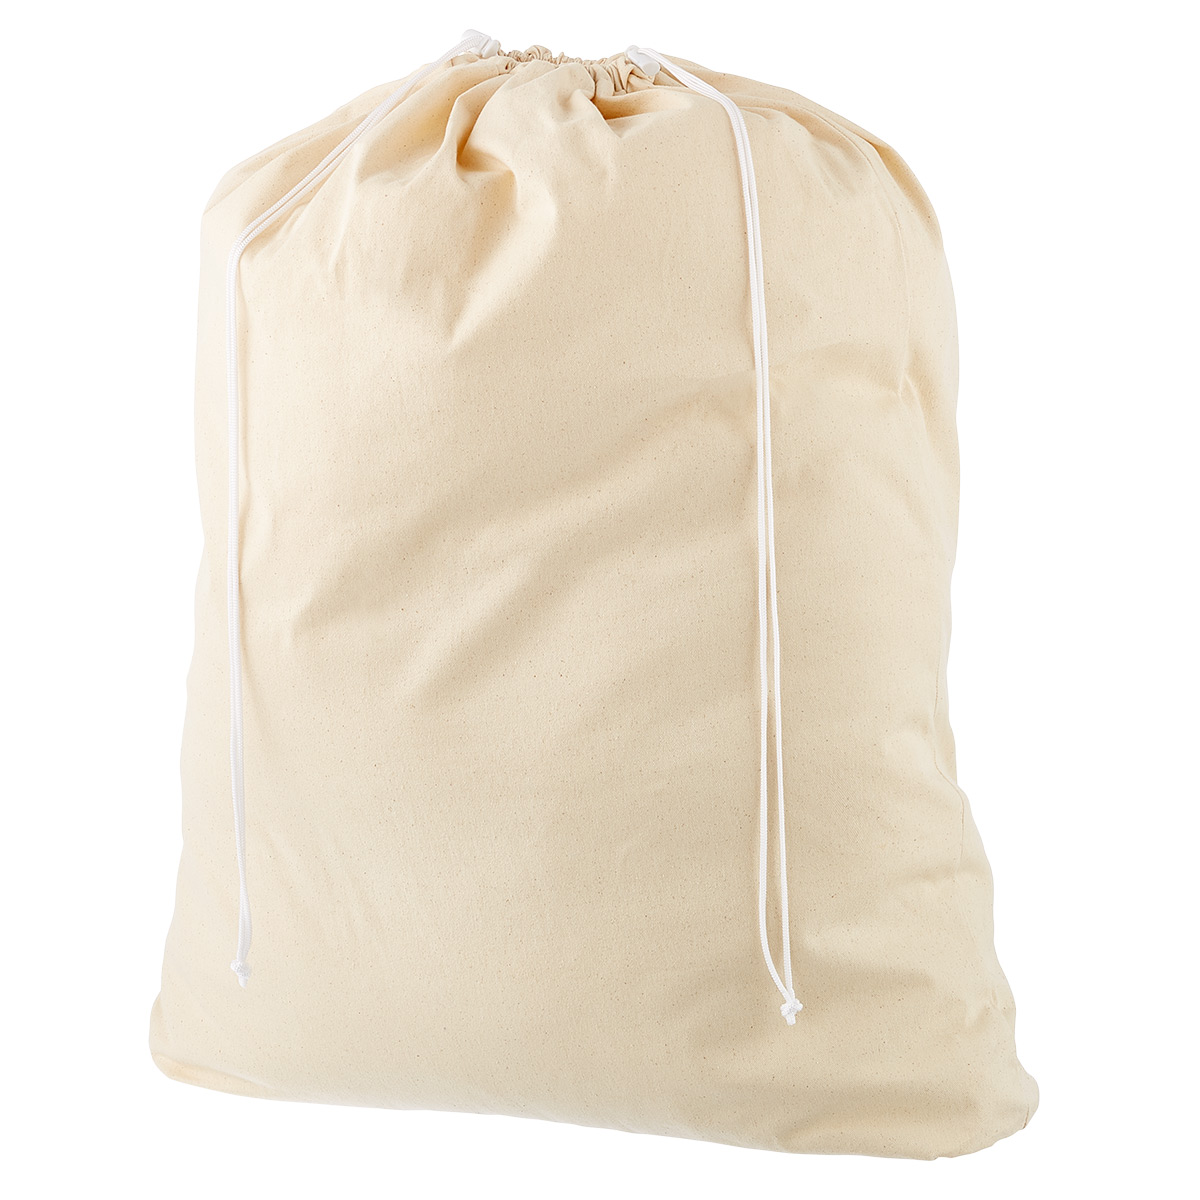 The Container Store Cotton Laundry Bag | The Container Store